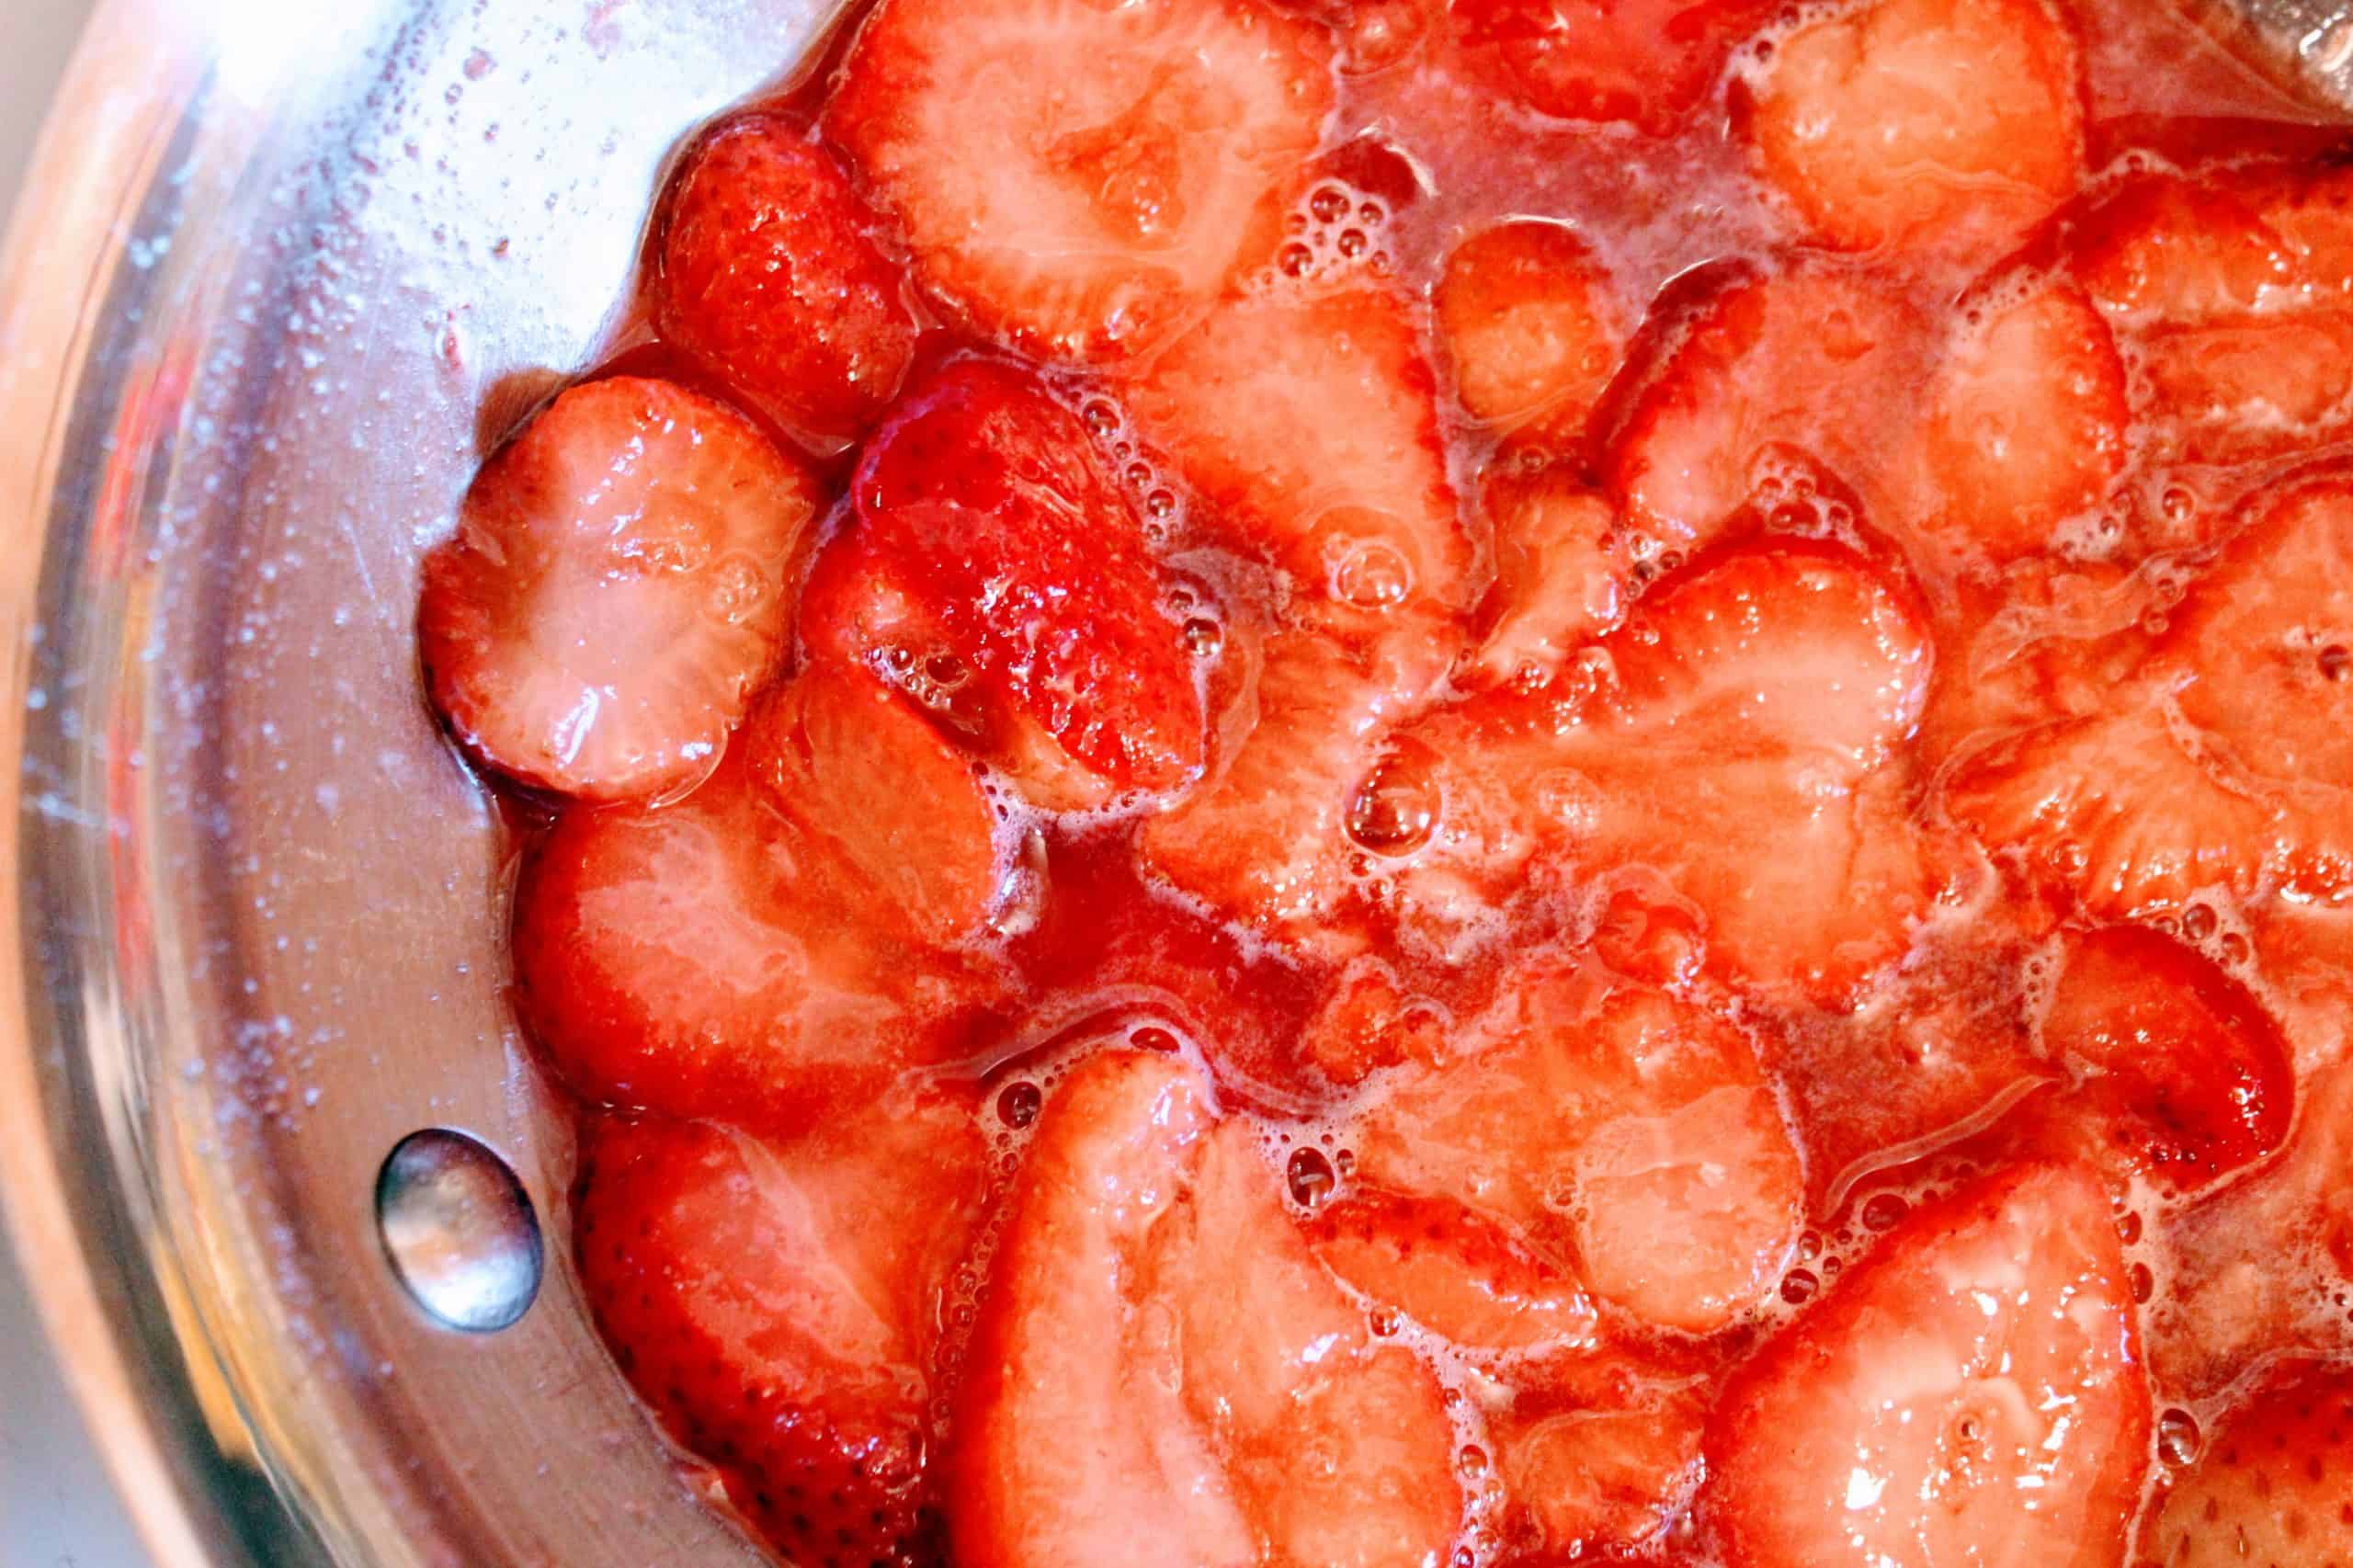 Add ingredients for easy keto strawberry sauce